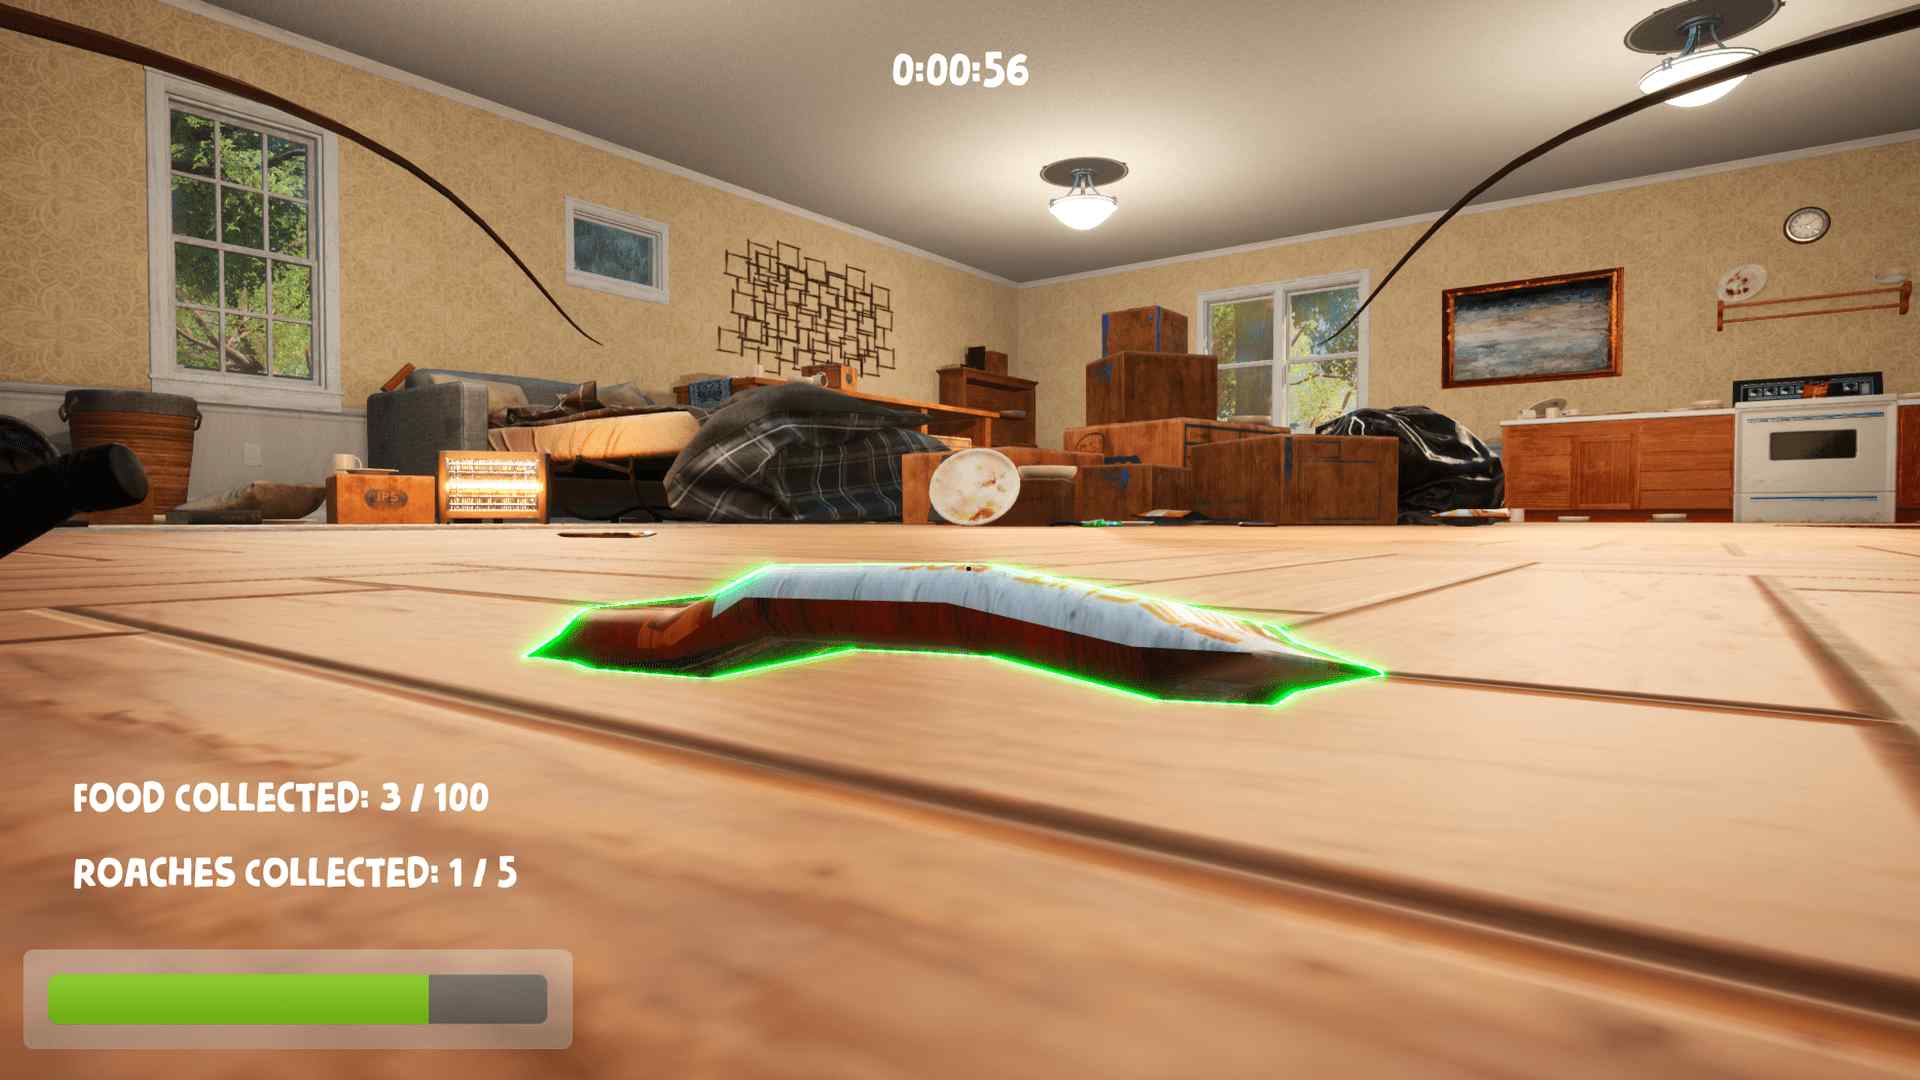 Roach Run's Simple First-Person HUD with Object Glow, Timer, Food Amnt, Roach Amnt, and Health